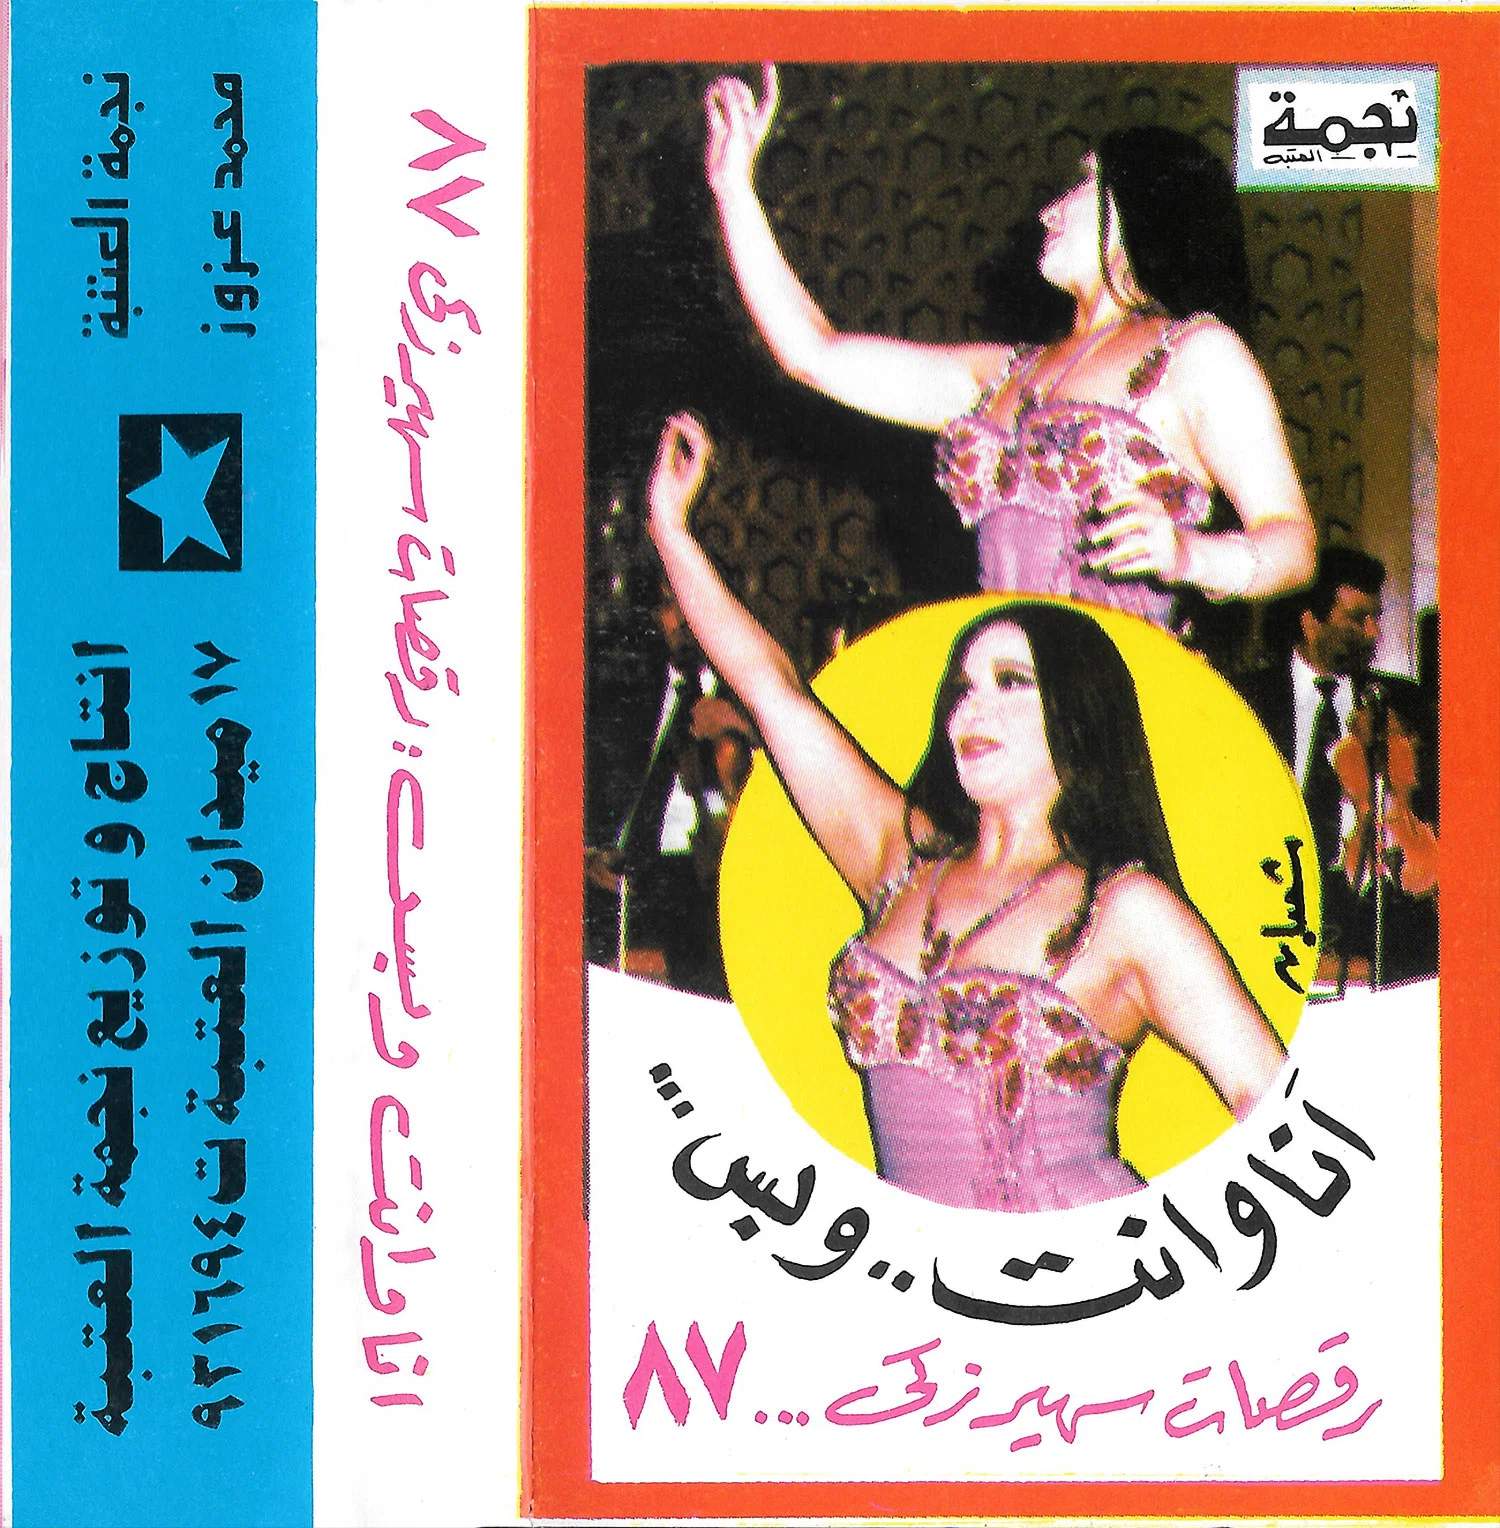 amr-hamid-egyptian-cassette-archive-graphic-design-itsnicethat-05.jpg